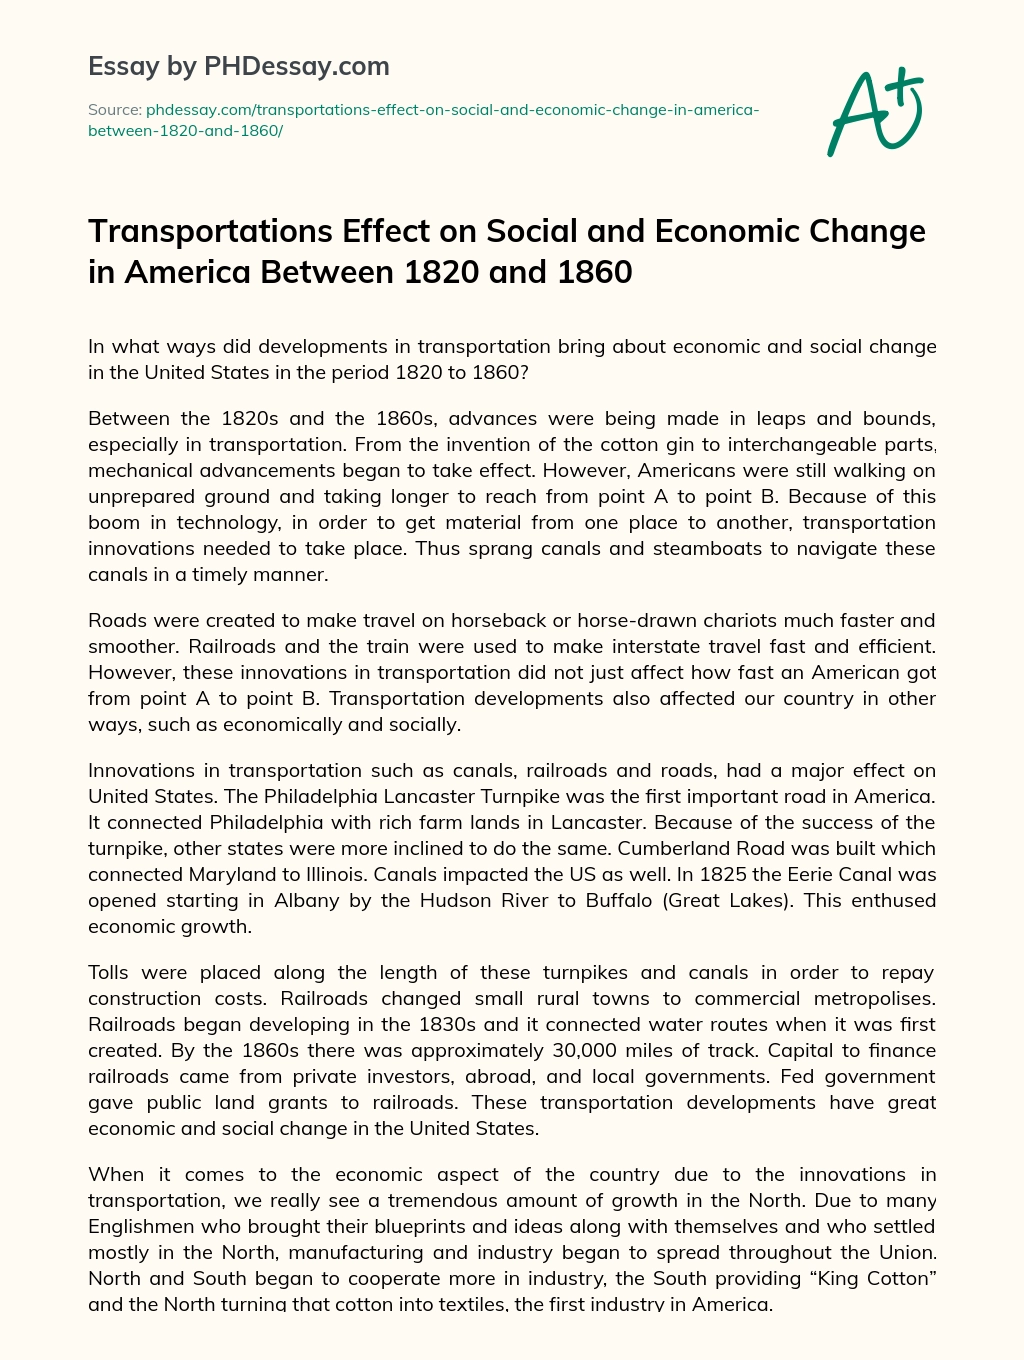 Transportations Effect on Social and Economic Change in America Between 1820 and 1860 essay